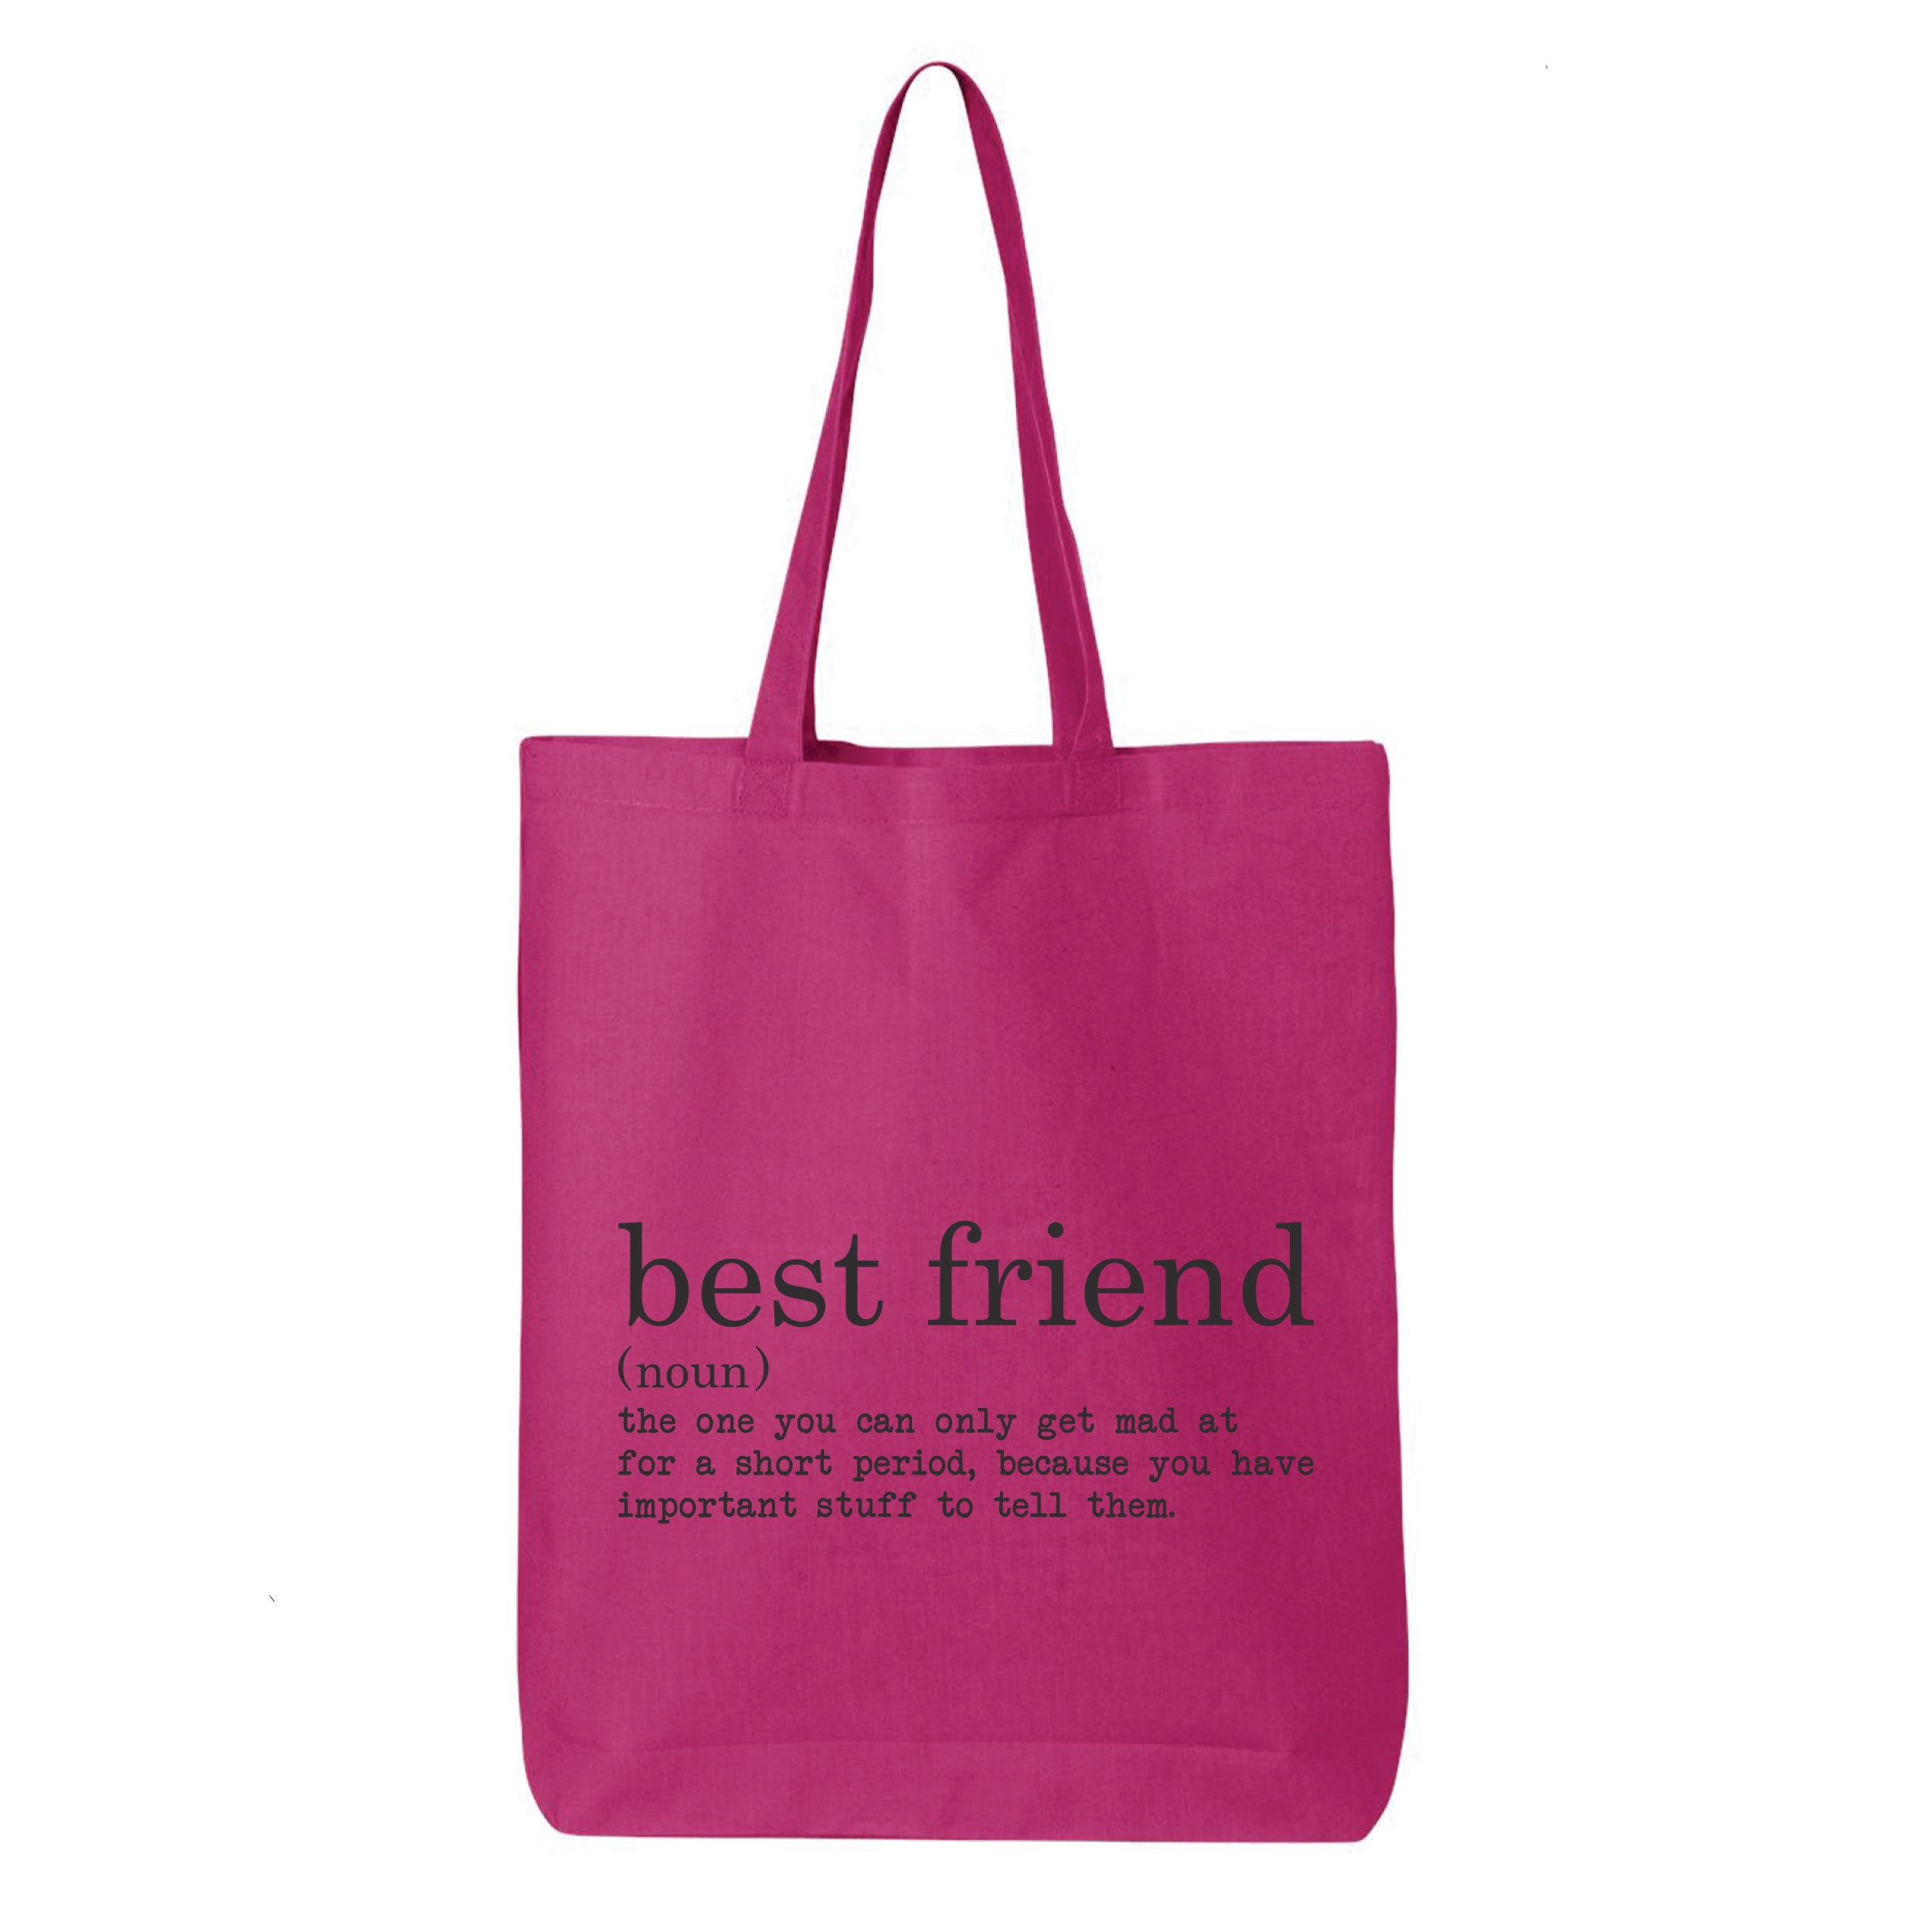 mom stuff tote bag, gifts for best friends, reusable bag